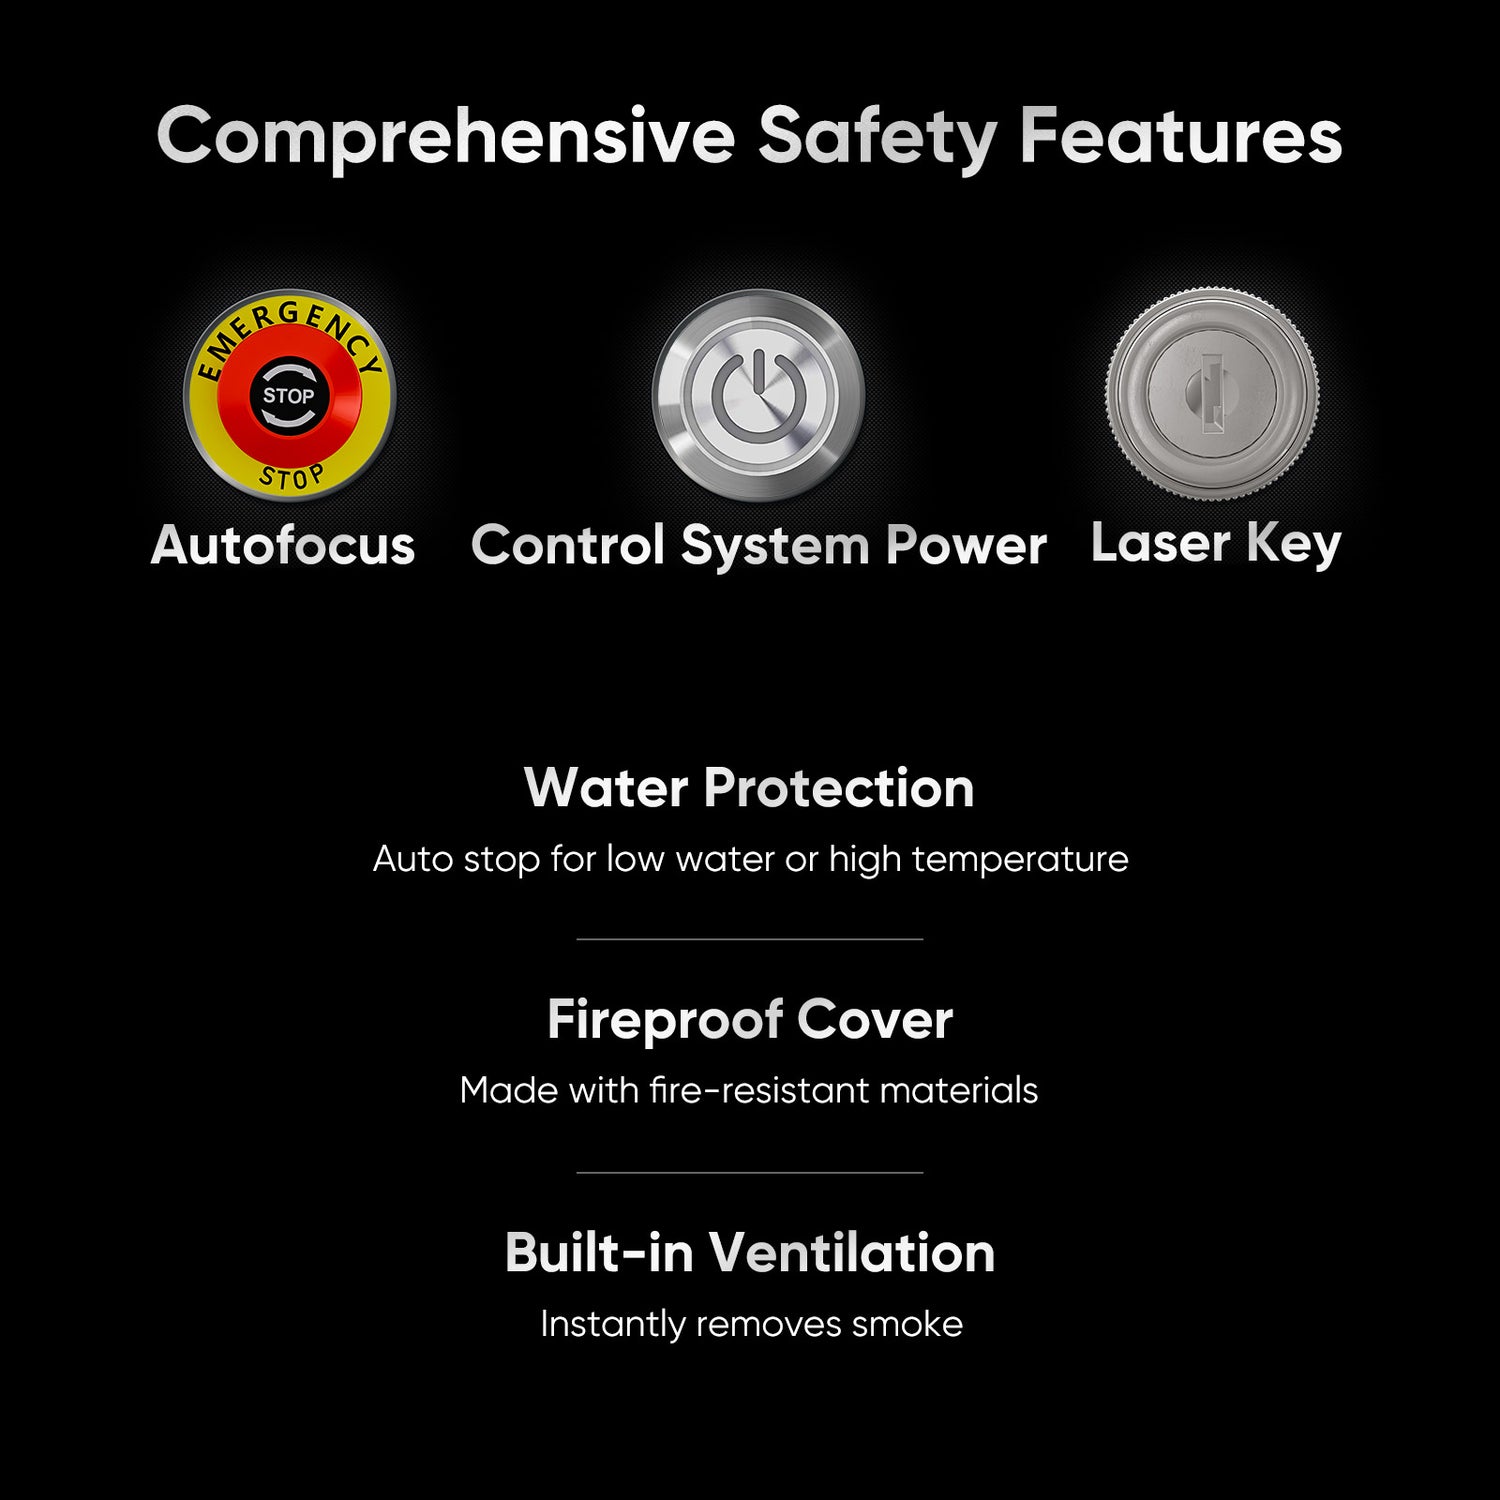 Comprehensive Safety Features